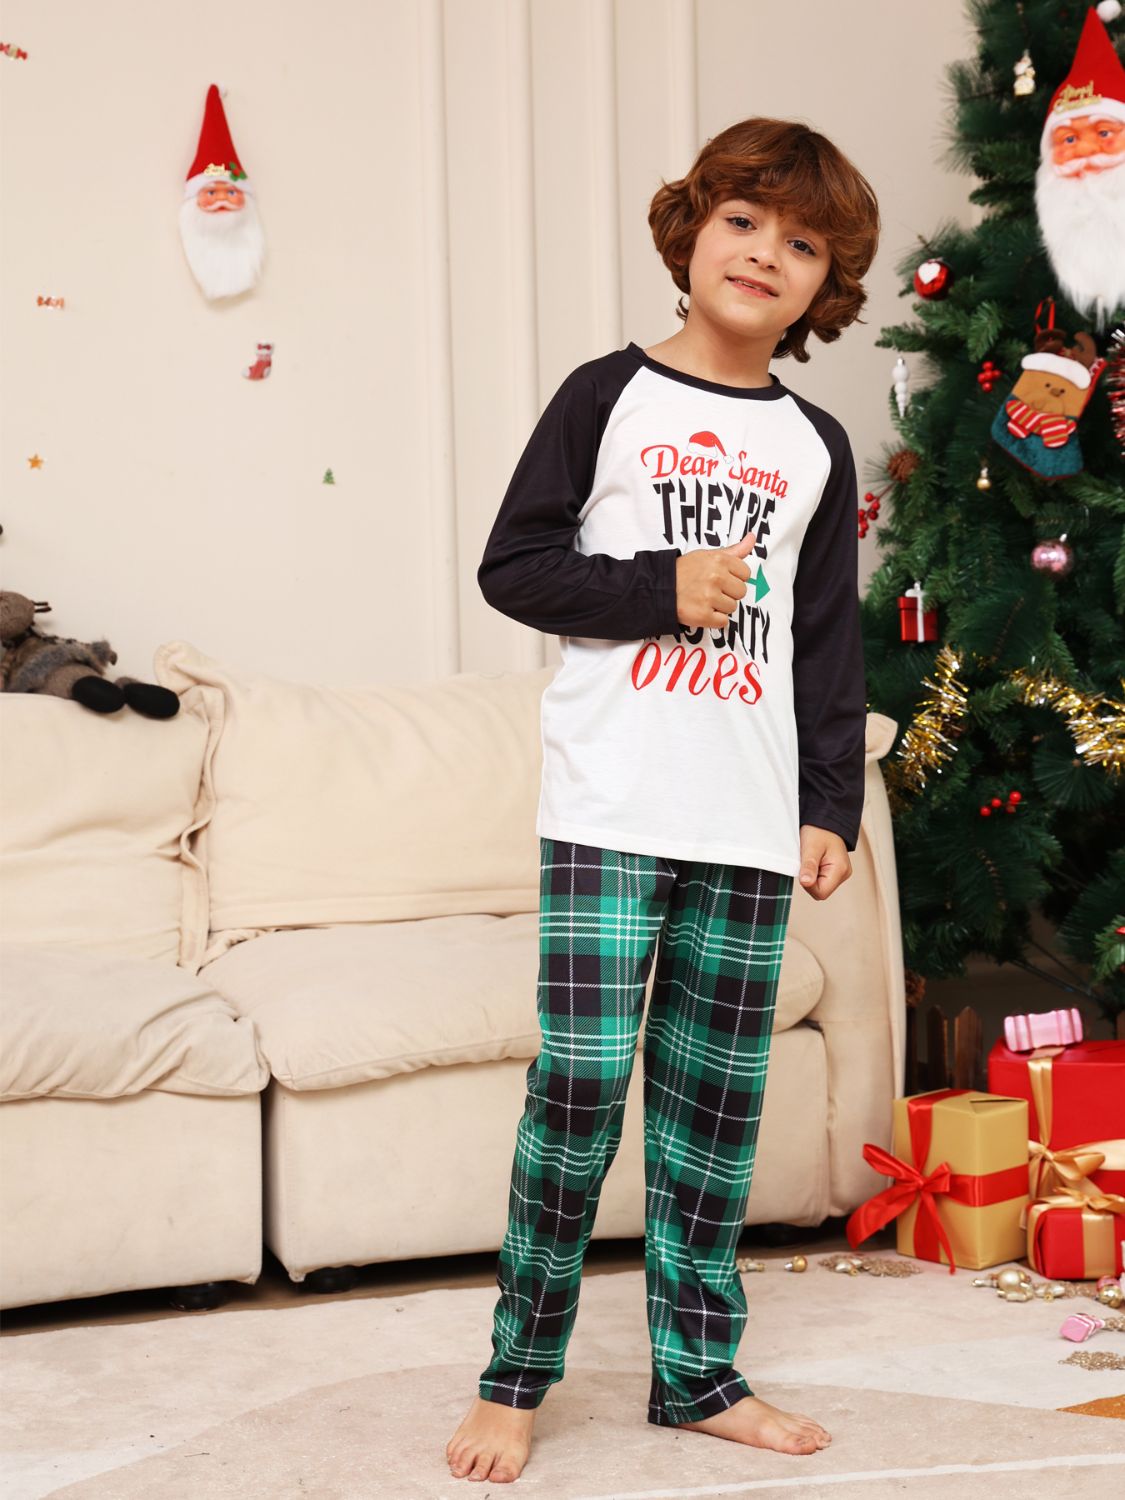 They're the Naughty One - Holiday PJ Set (Toddler/Youth)